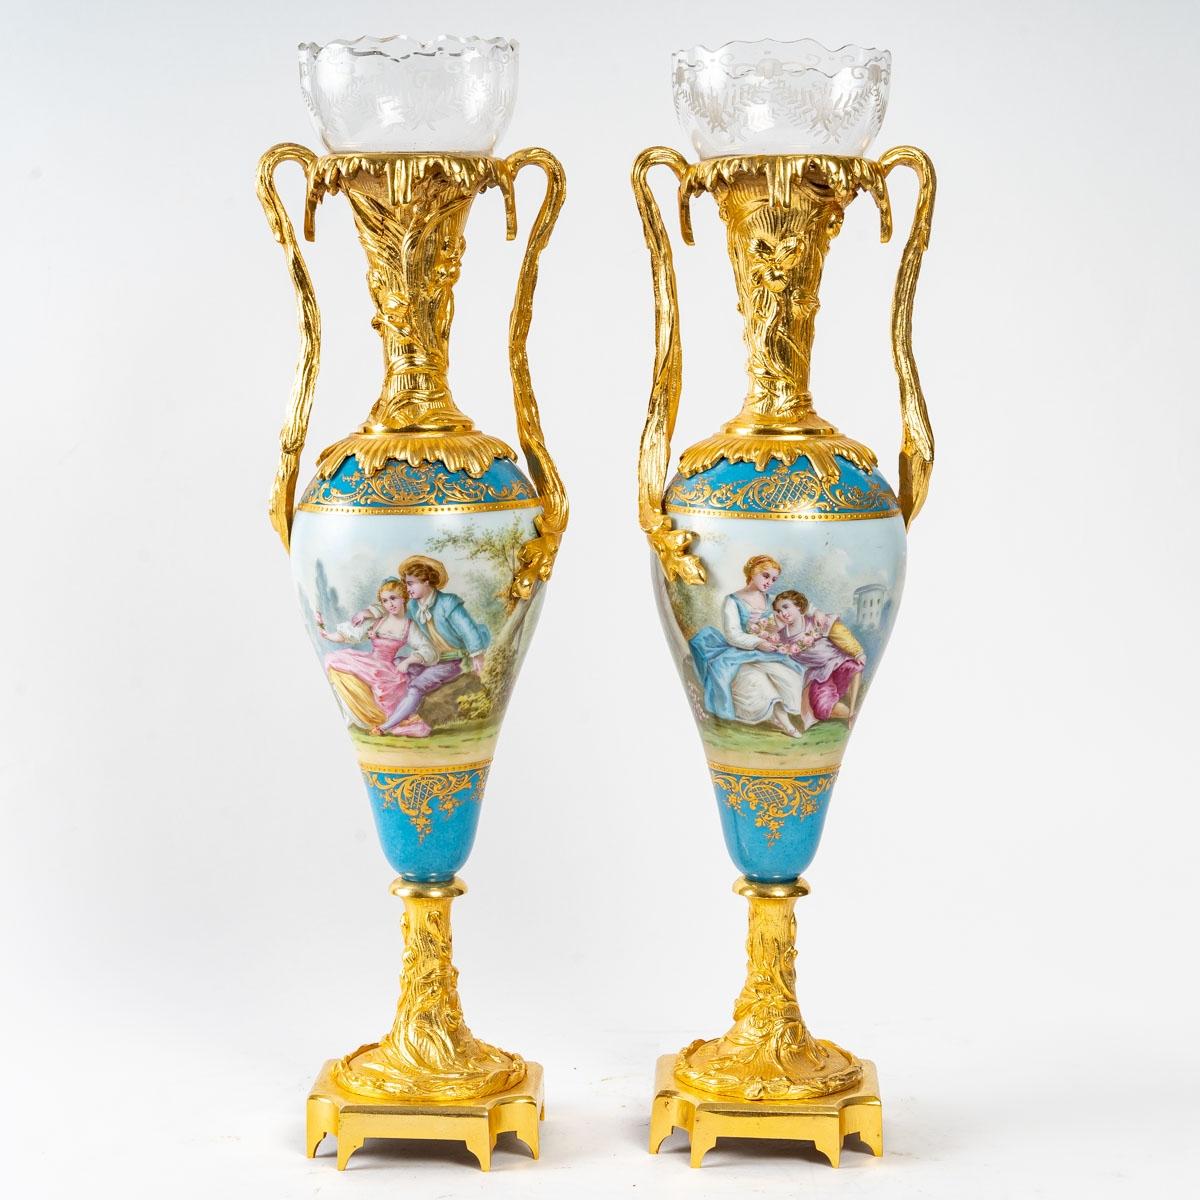 Pair of Sèvres Porcelain vases, crystal and gilded bronze, Napoleon III period, 19th century.
Measures: H 47 cm, W 16 cm, D 12 cm.